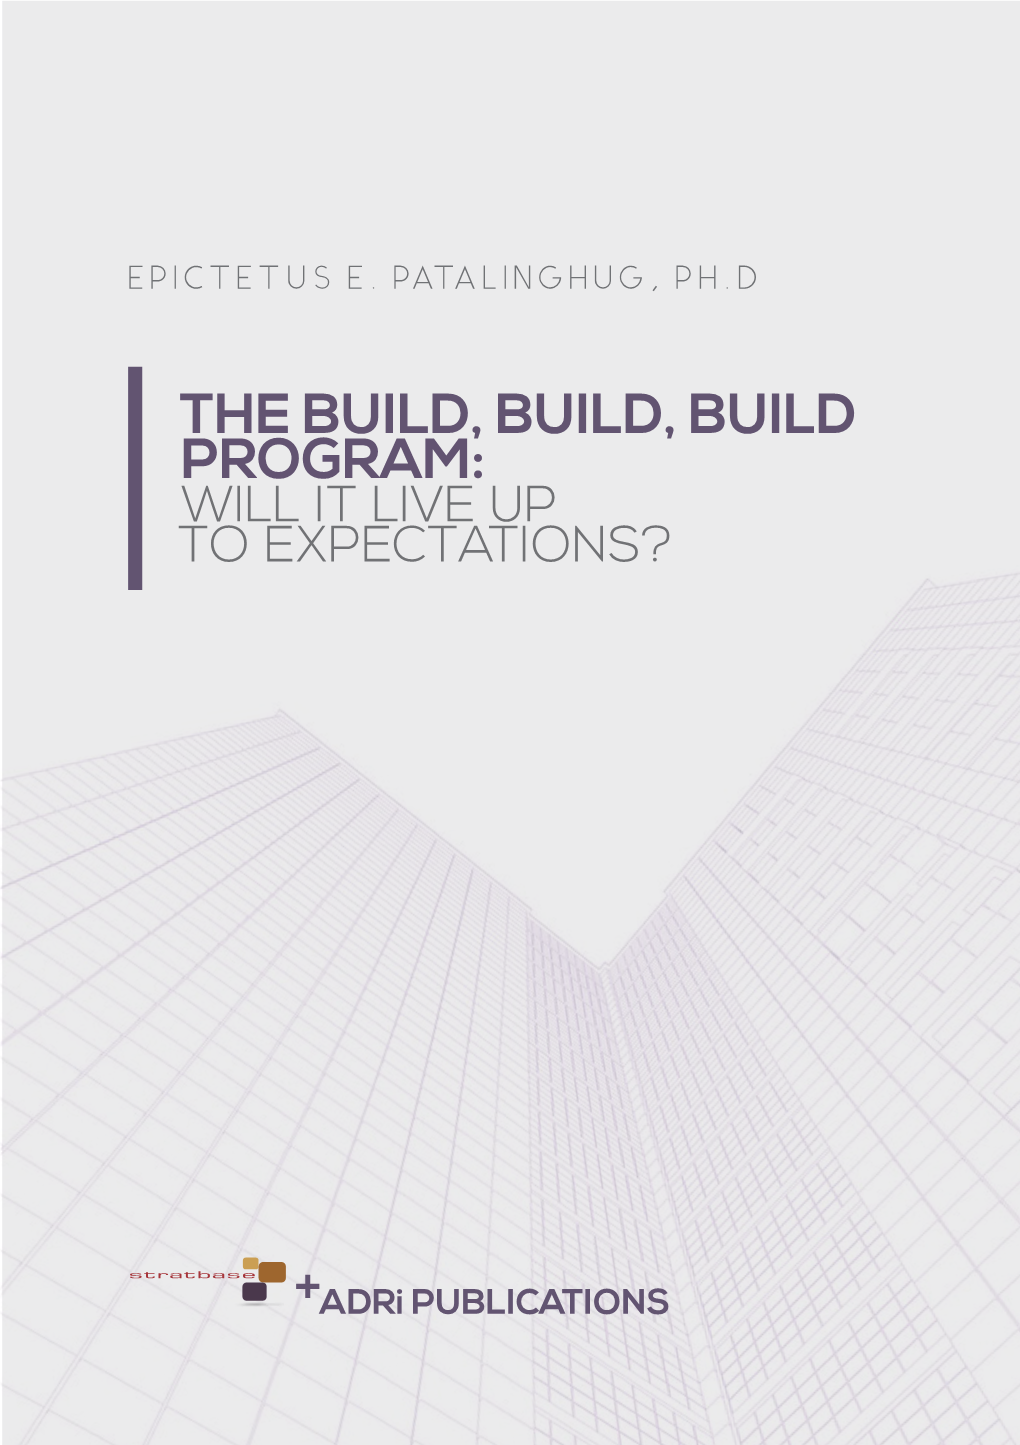 The Build, Build, Build Program: Will It Live up to Expectations?